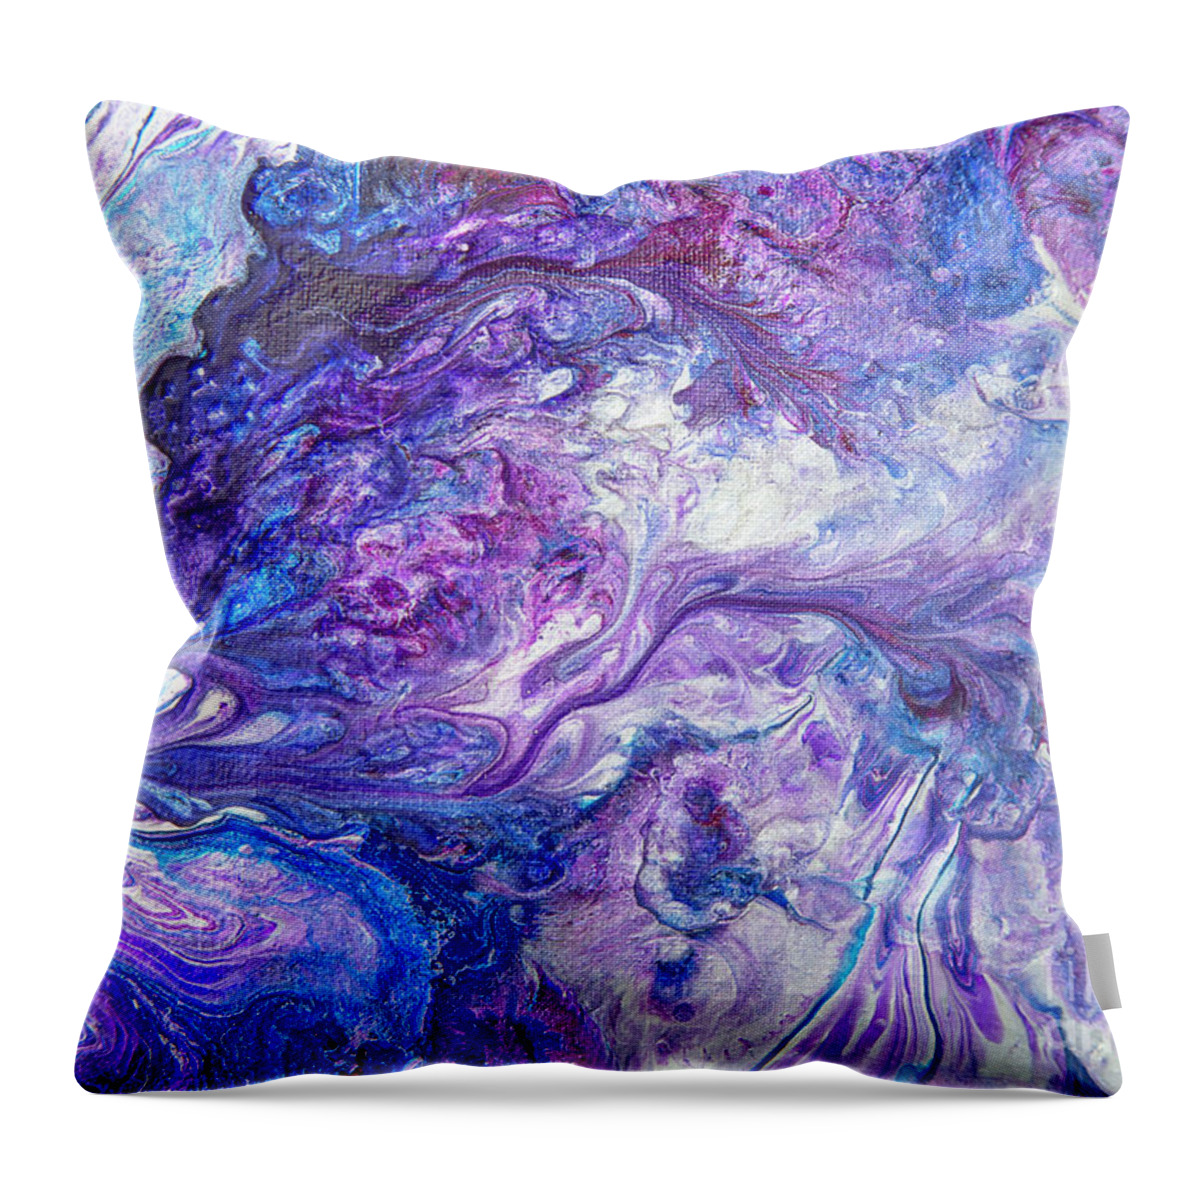 Acrylic Pour Throw Pillow featuring the painting Acrylic Pour Amethyst Ocean by Elisabeth Lucas